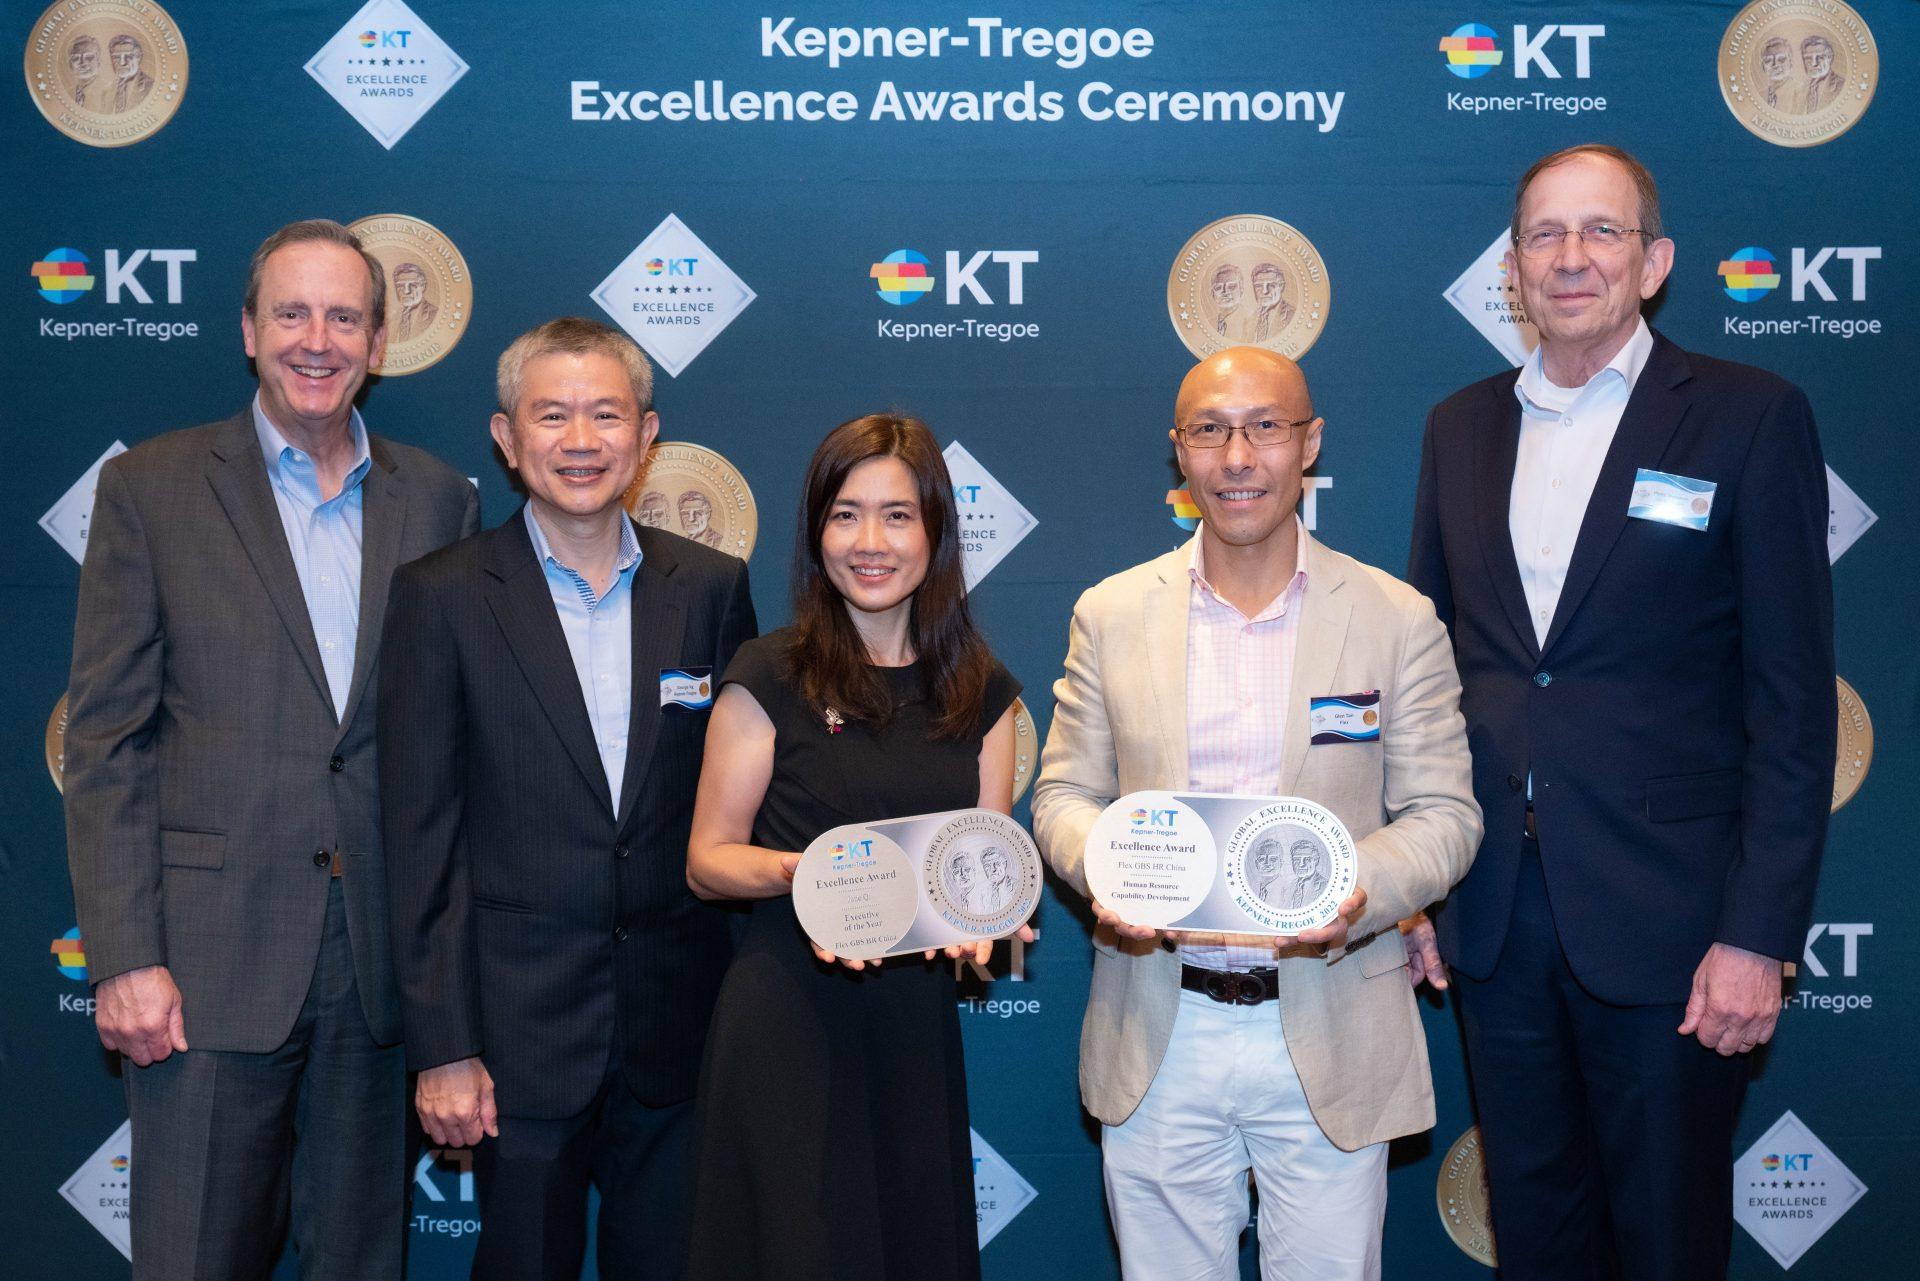 KT Excellence Awards Ceremony